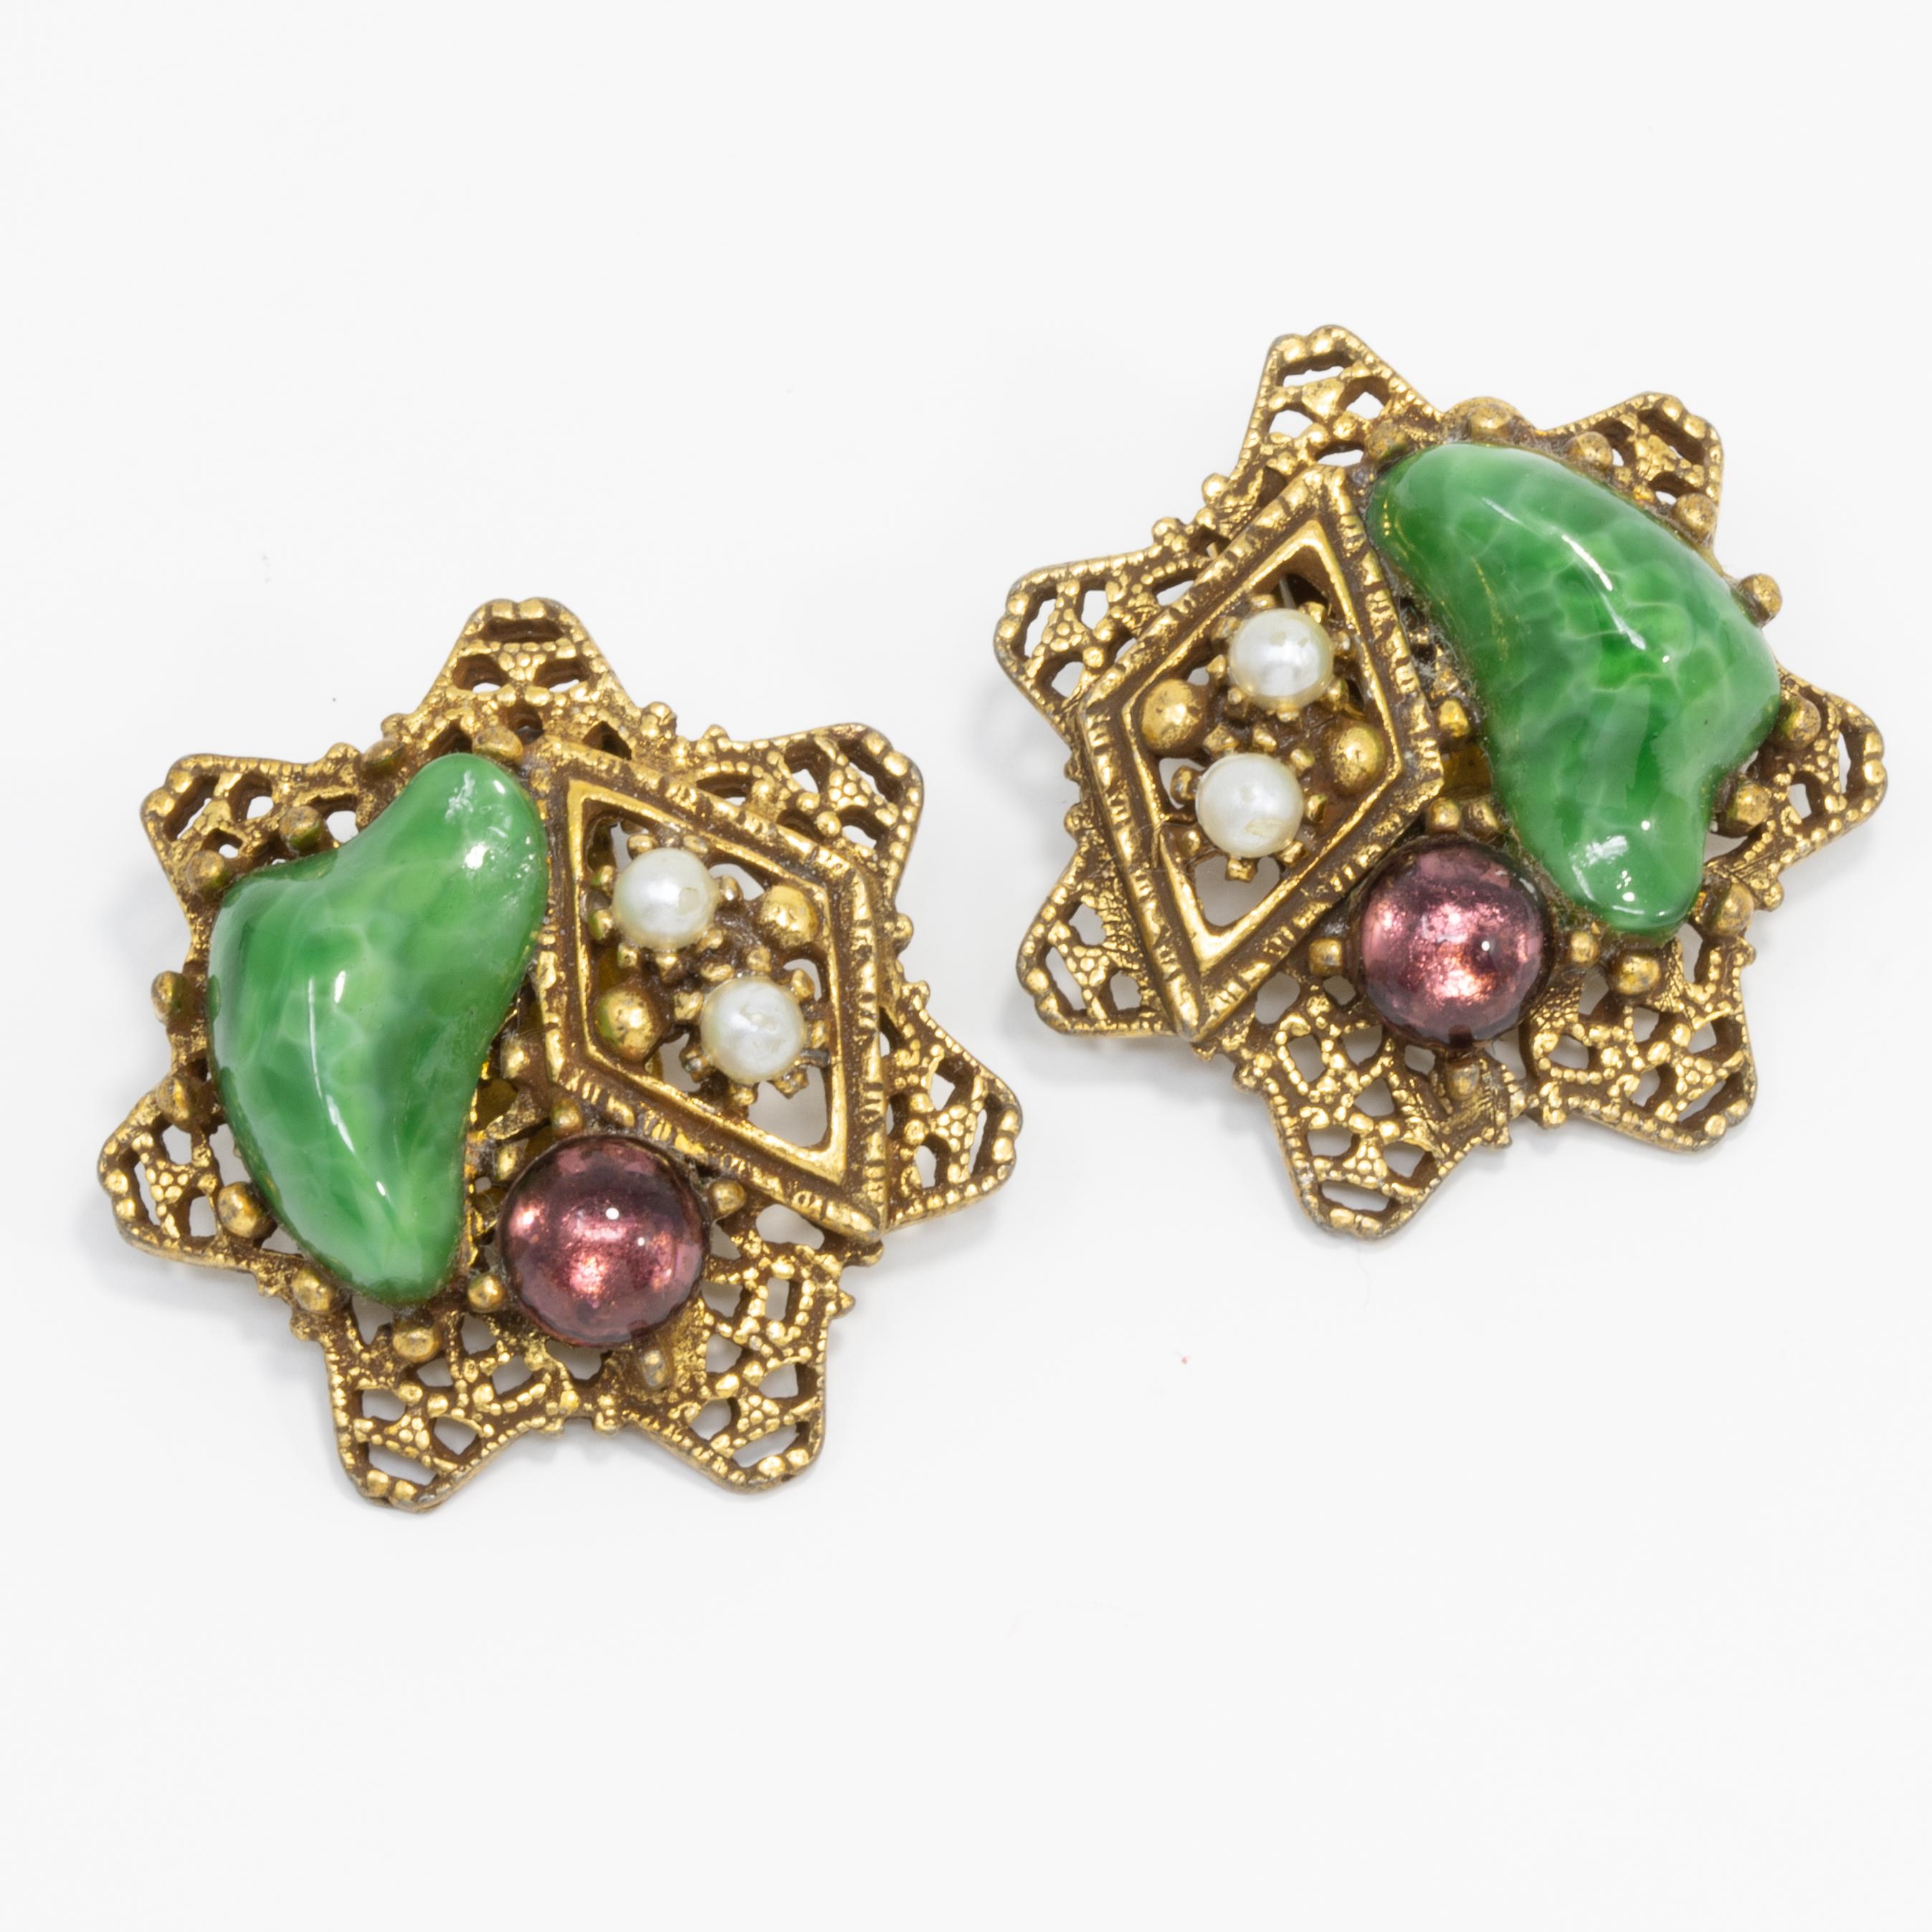 A pair of 1950s Arthur Pepper clip on earrings, featuring gold-tone stars decorated with jade and amethyst crystals, and faux pearls.

Hallmarks: Art